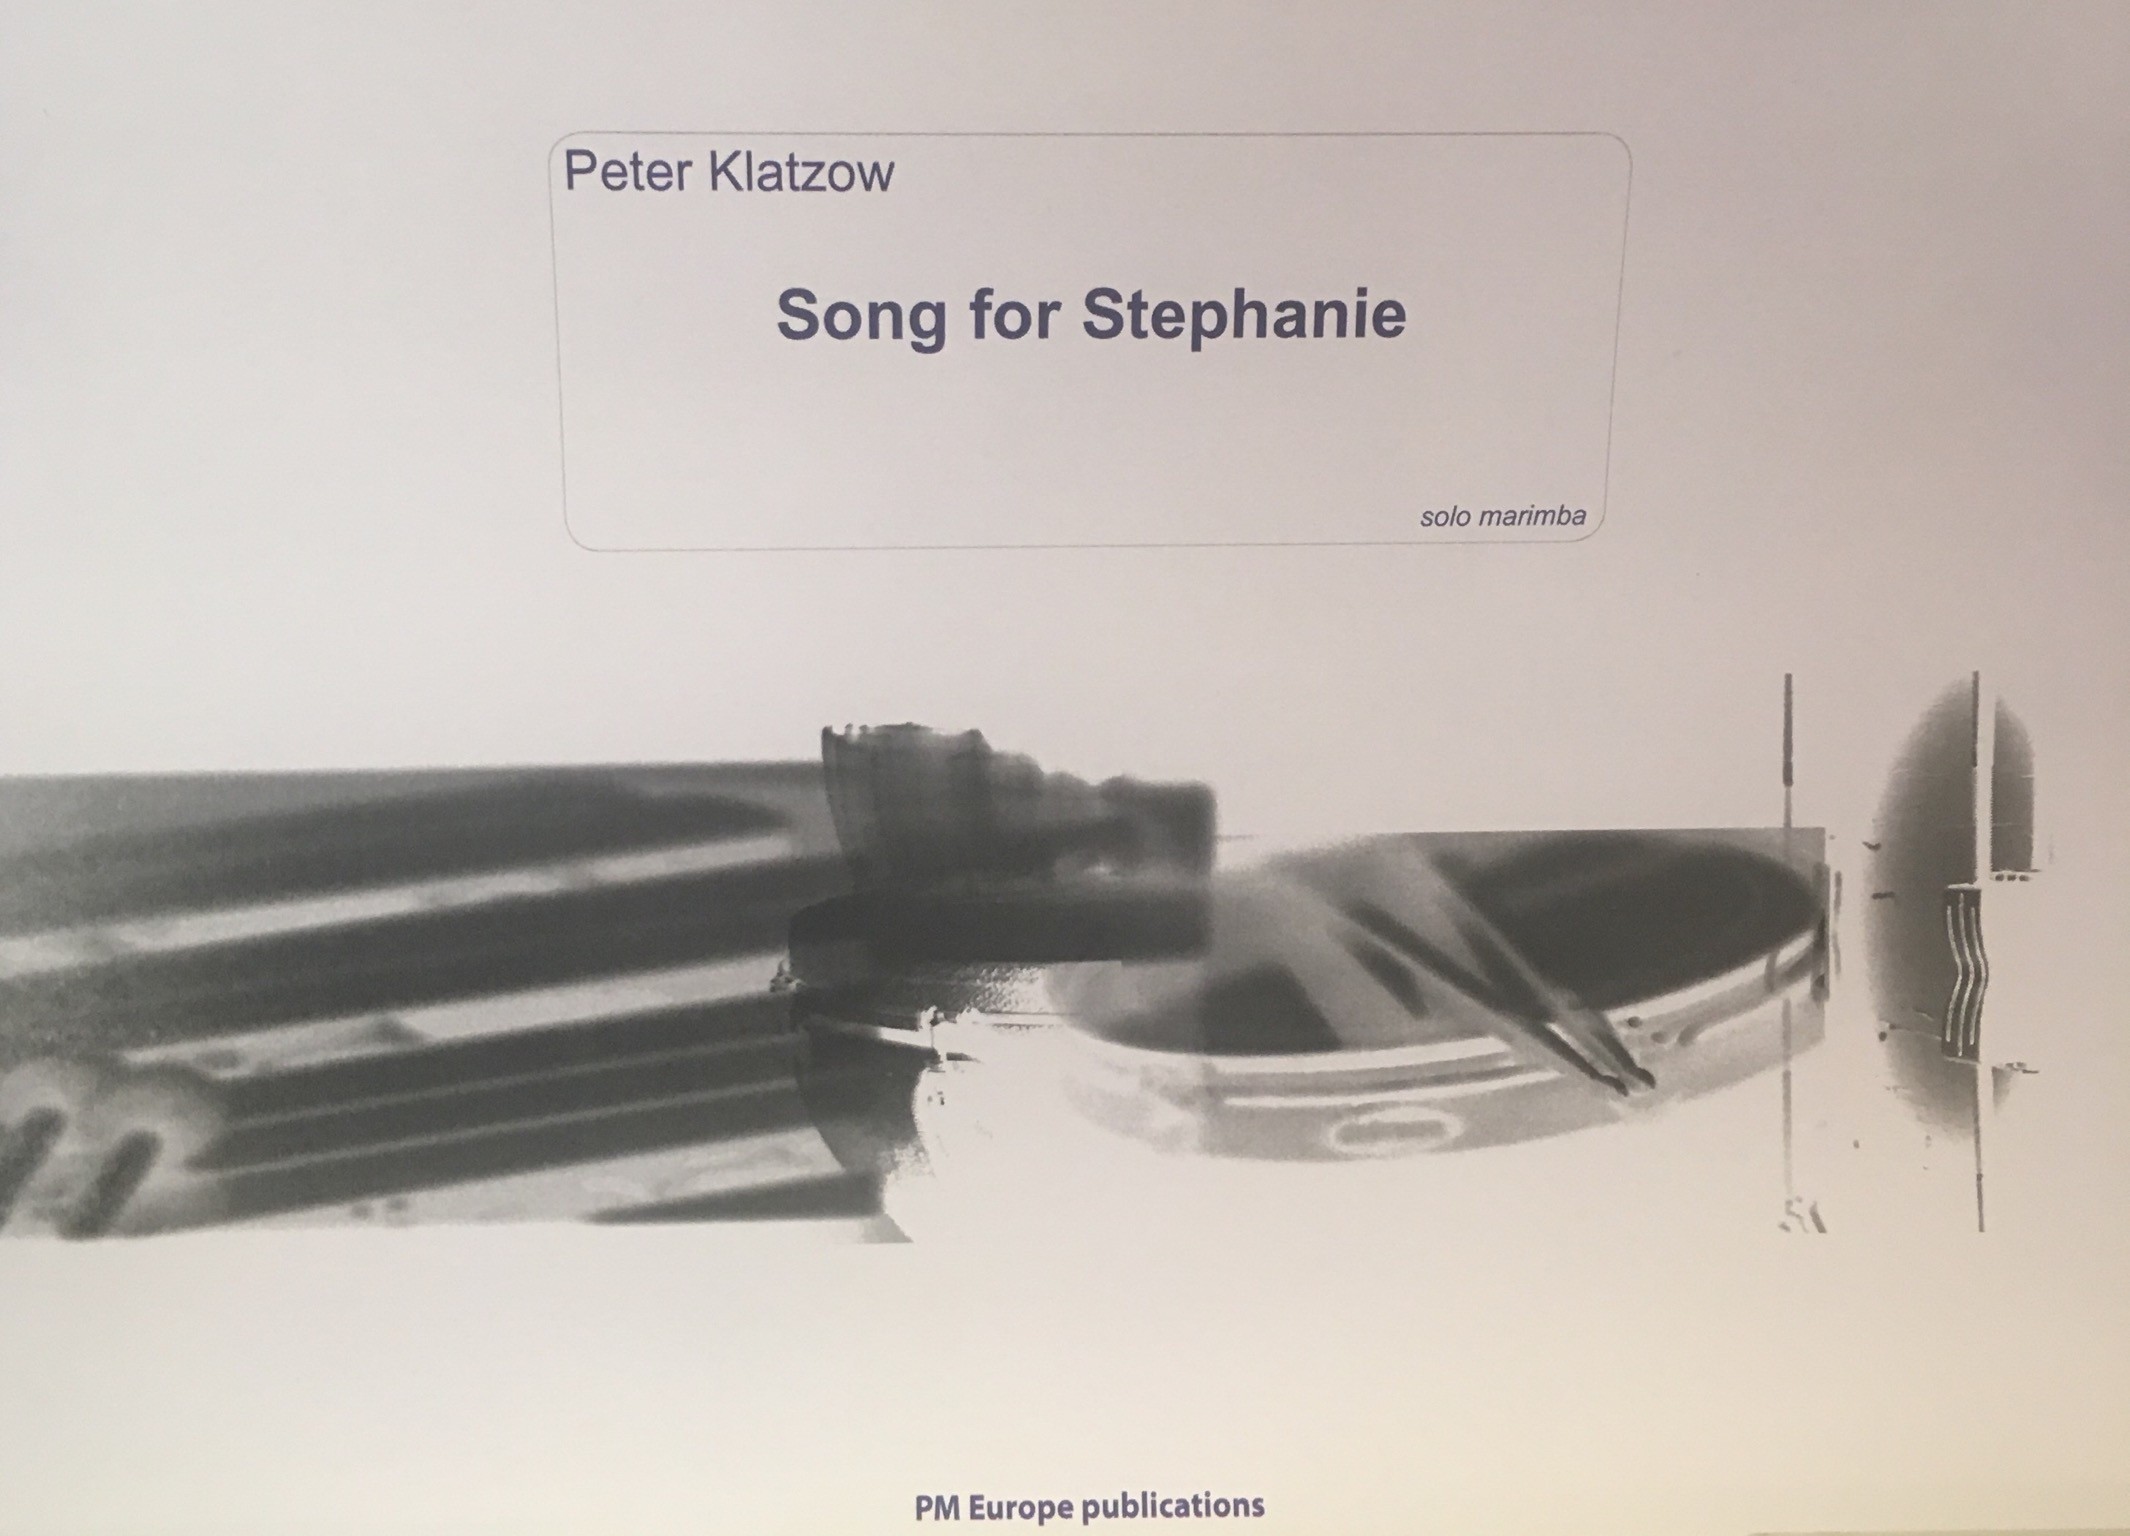 Song for Stephanie by Peter Klatzow